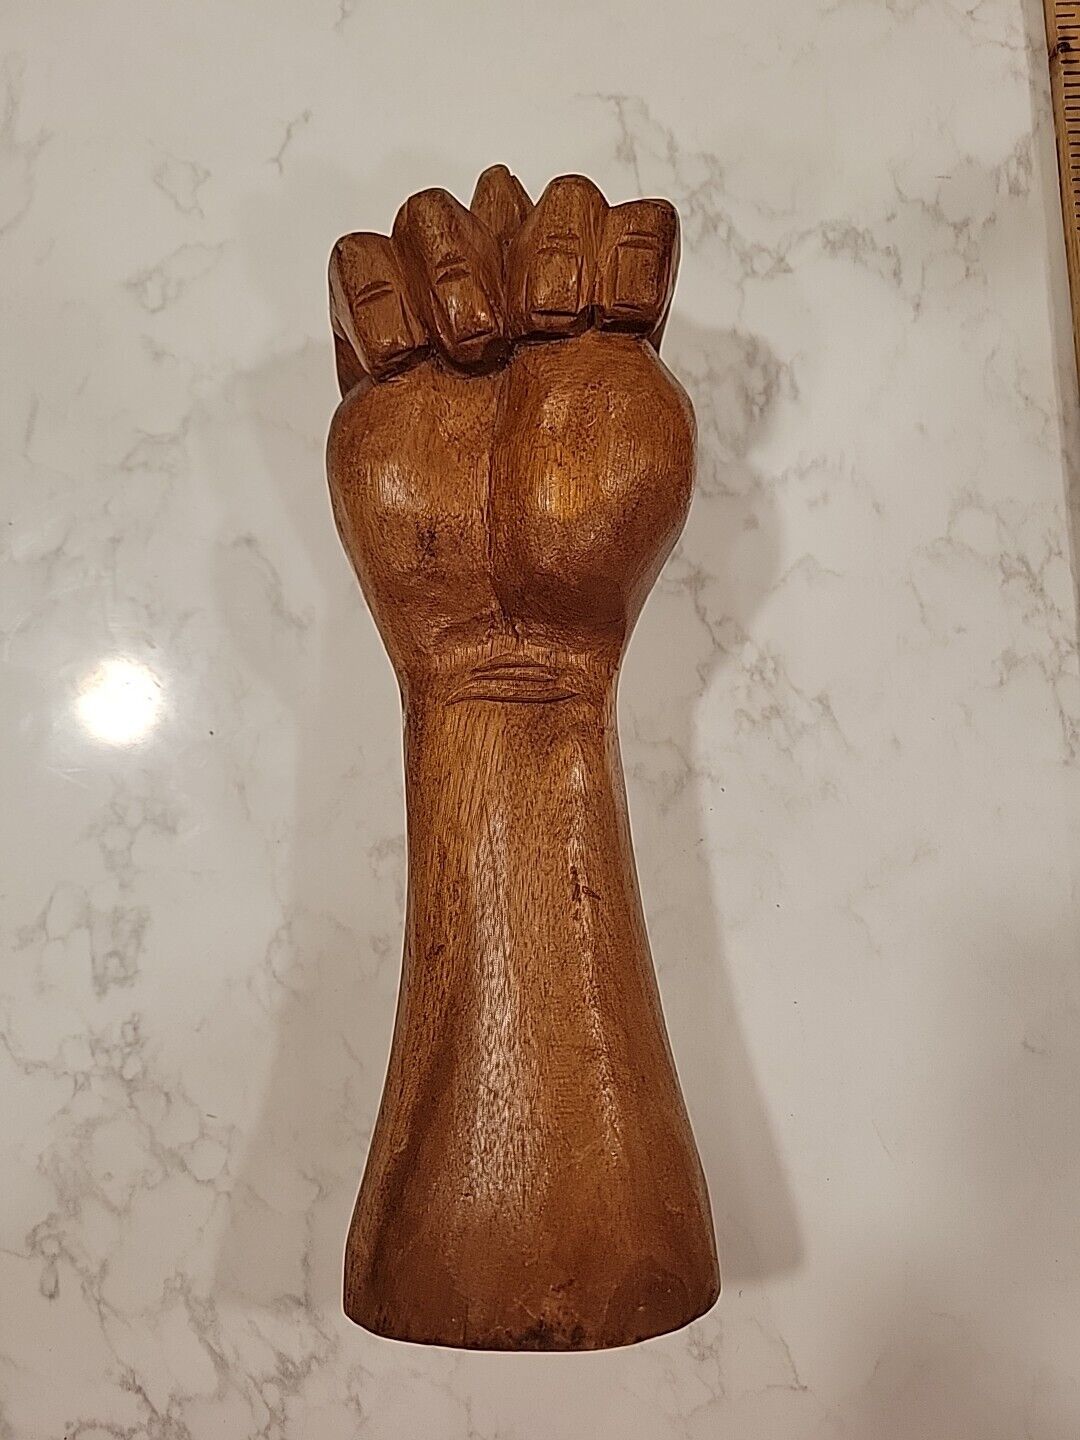 Vintage Mid Century Figa Fist Hand Carved Wooden Statue Luck Fertility 9.5”